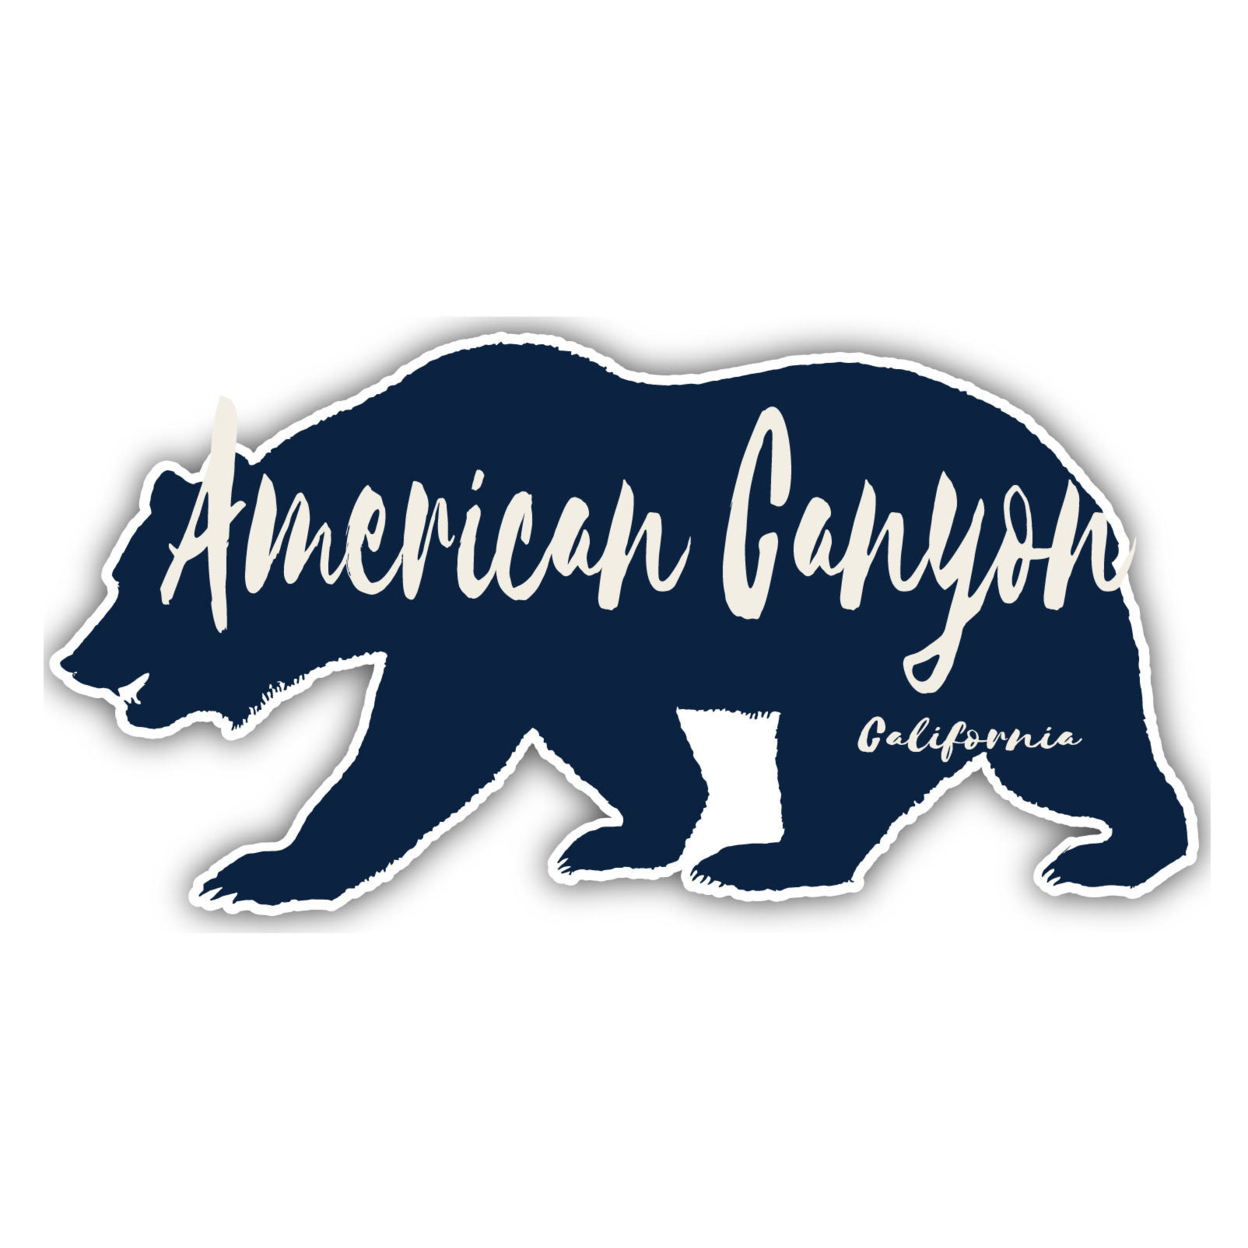 American Canyon California Souvenir Decorative Stickers (Choose Theme And Size) - 4-Pack, 4-Inch, Bear